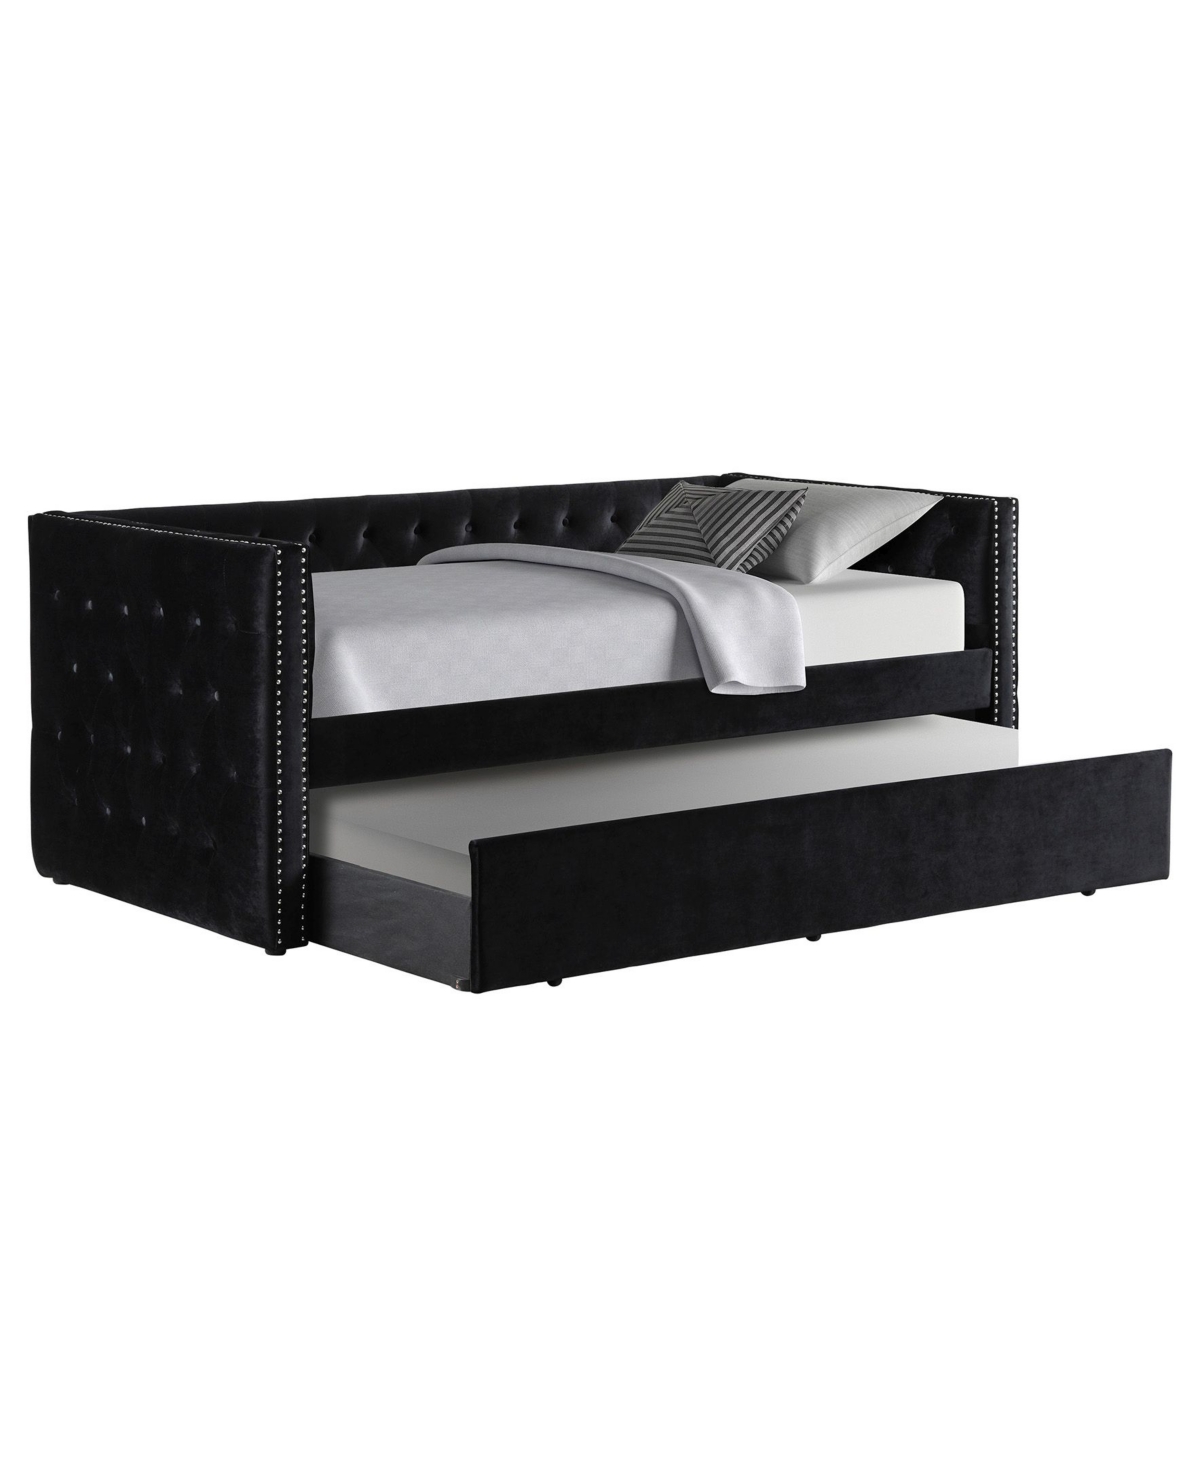 Best Master Furniture Nikora Tufted Daybed With Trundle, 86" In Black